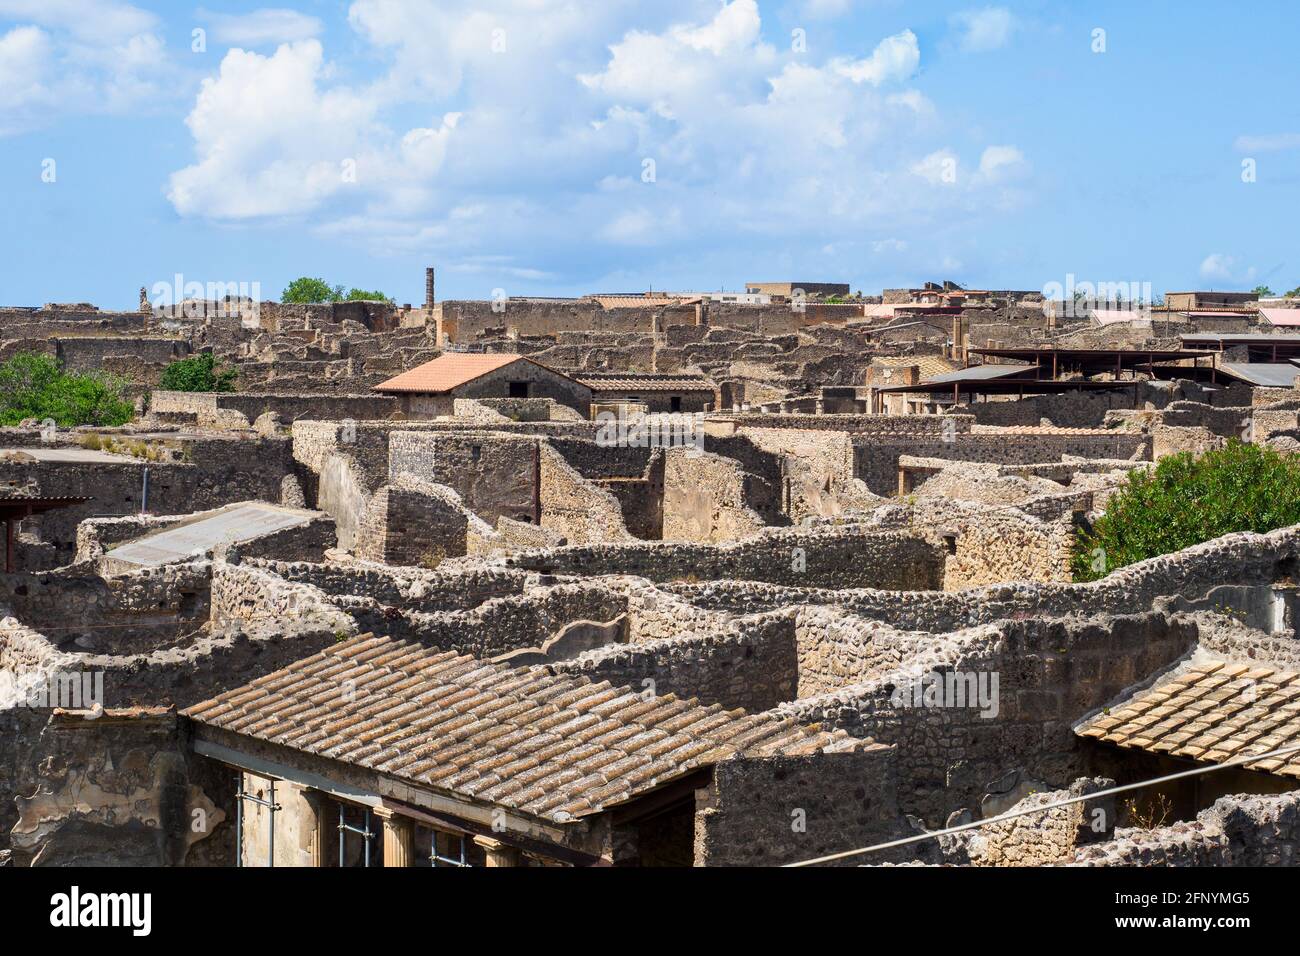 Ruins in Pompeii archaeological site, Italy Stock Photo